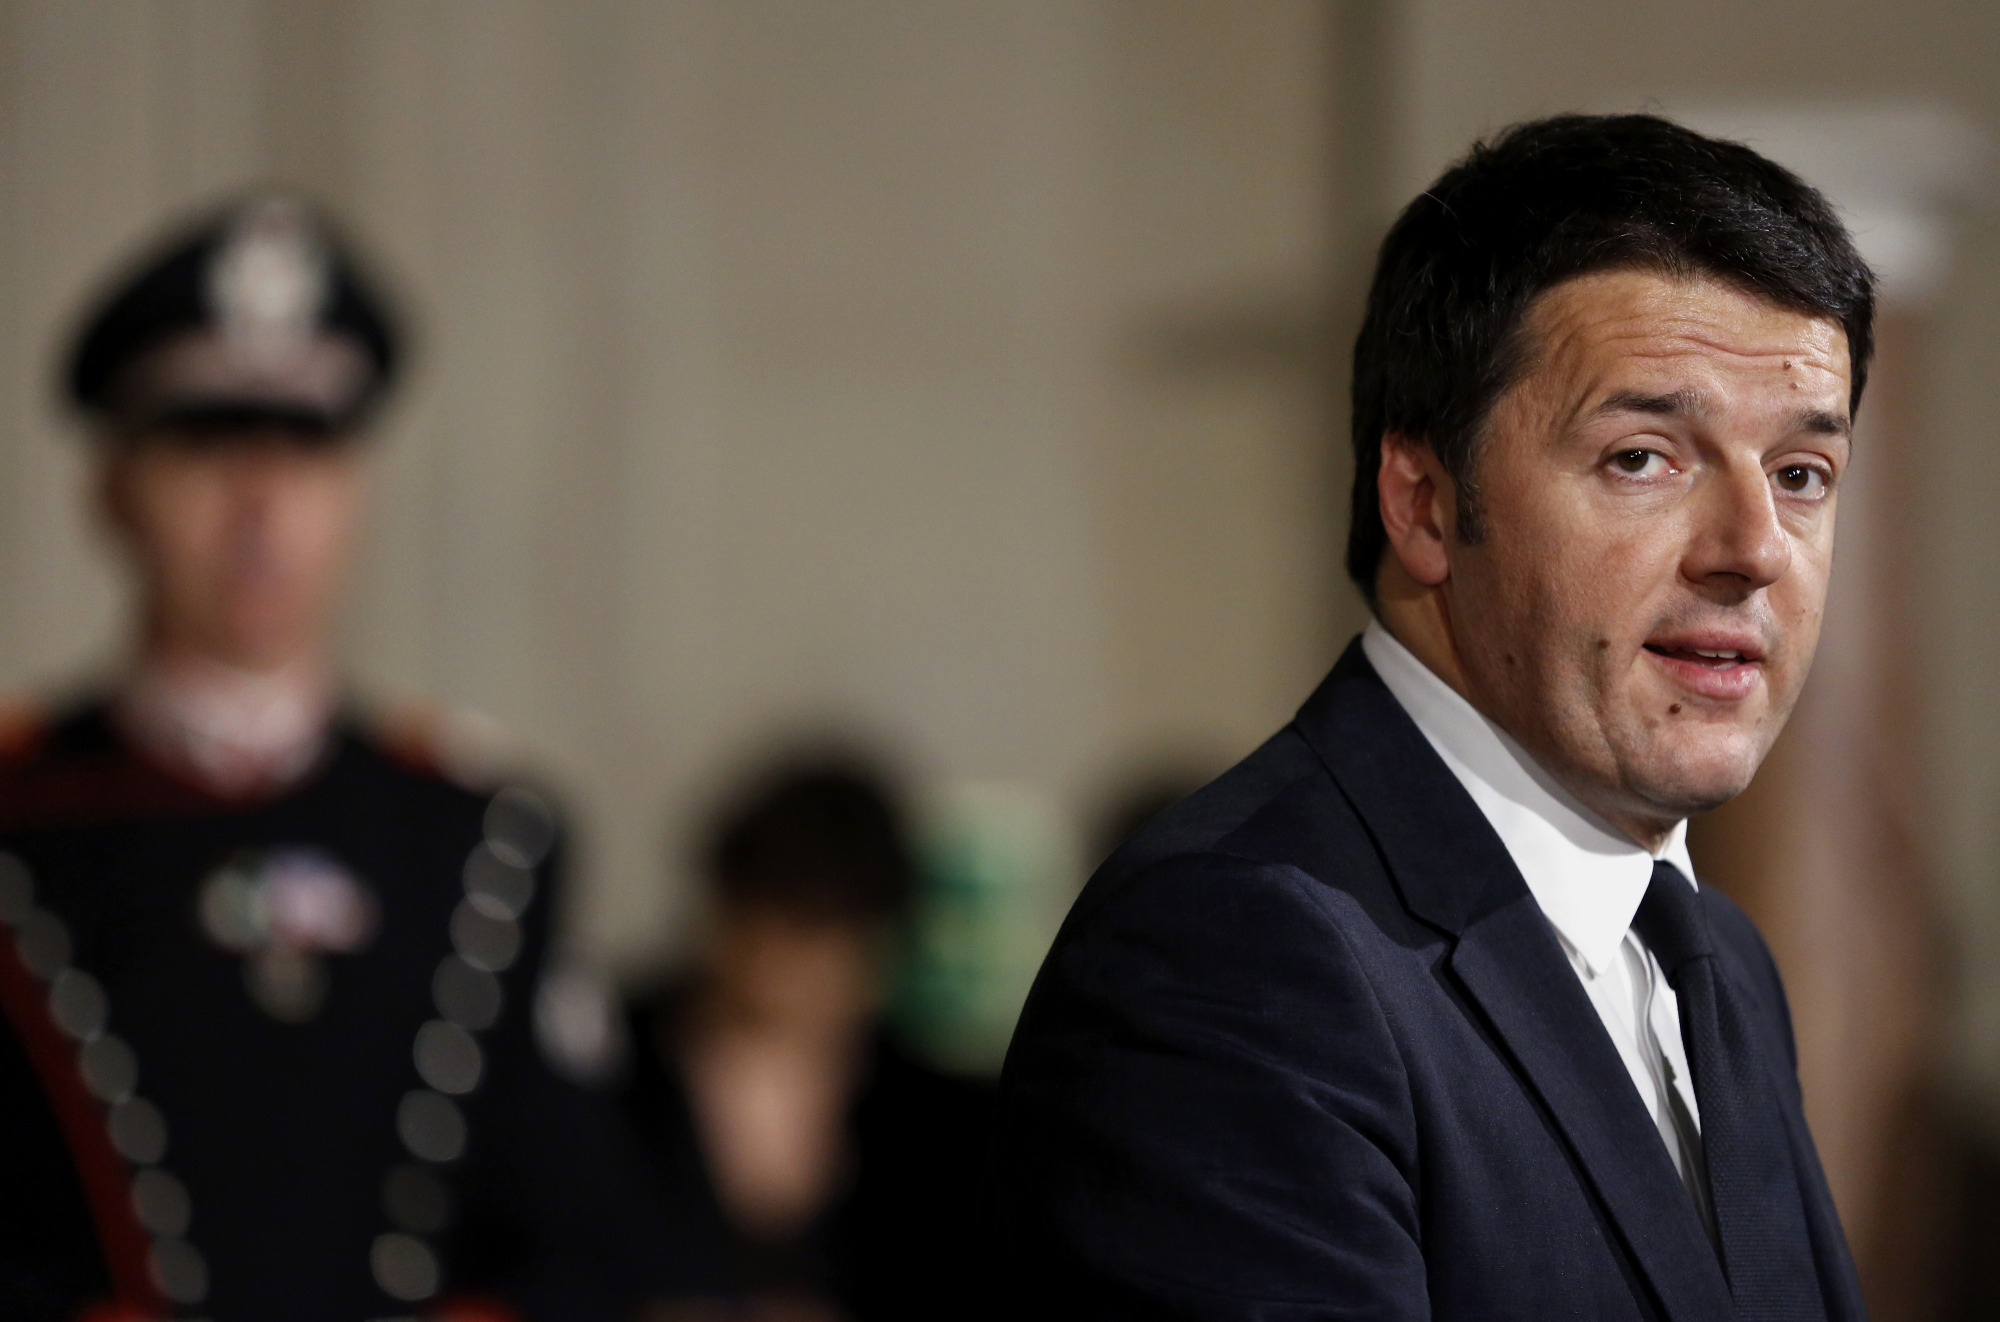 Matteo Renzi, Italy's incoming prime minister, speaks during a news conference to announce the names of the cabinet ministers that will form Italy's new government on Friday, Feb. 21, 2014. (Bloomberg&mdash;Getty Images)